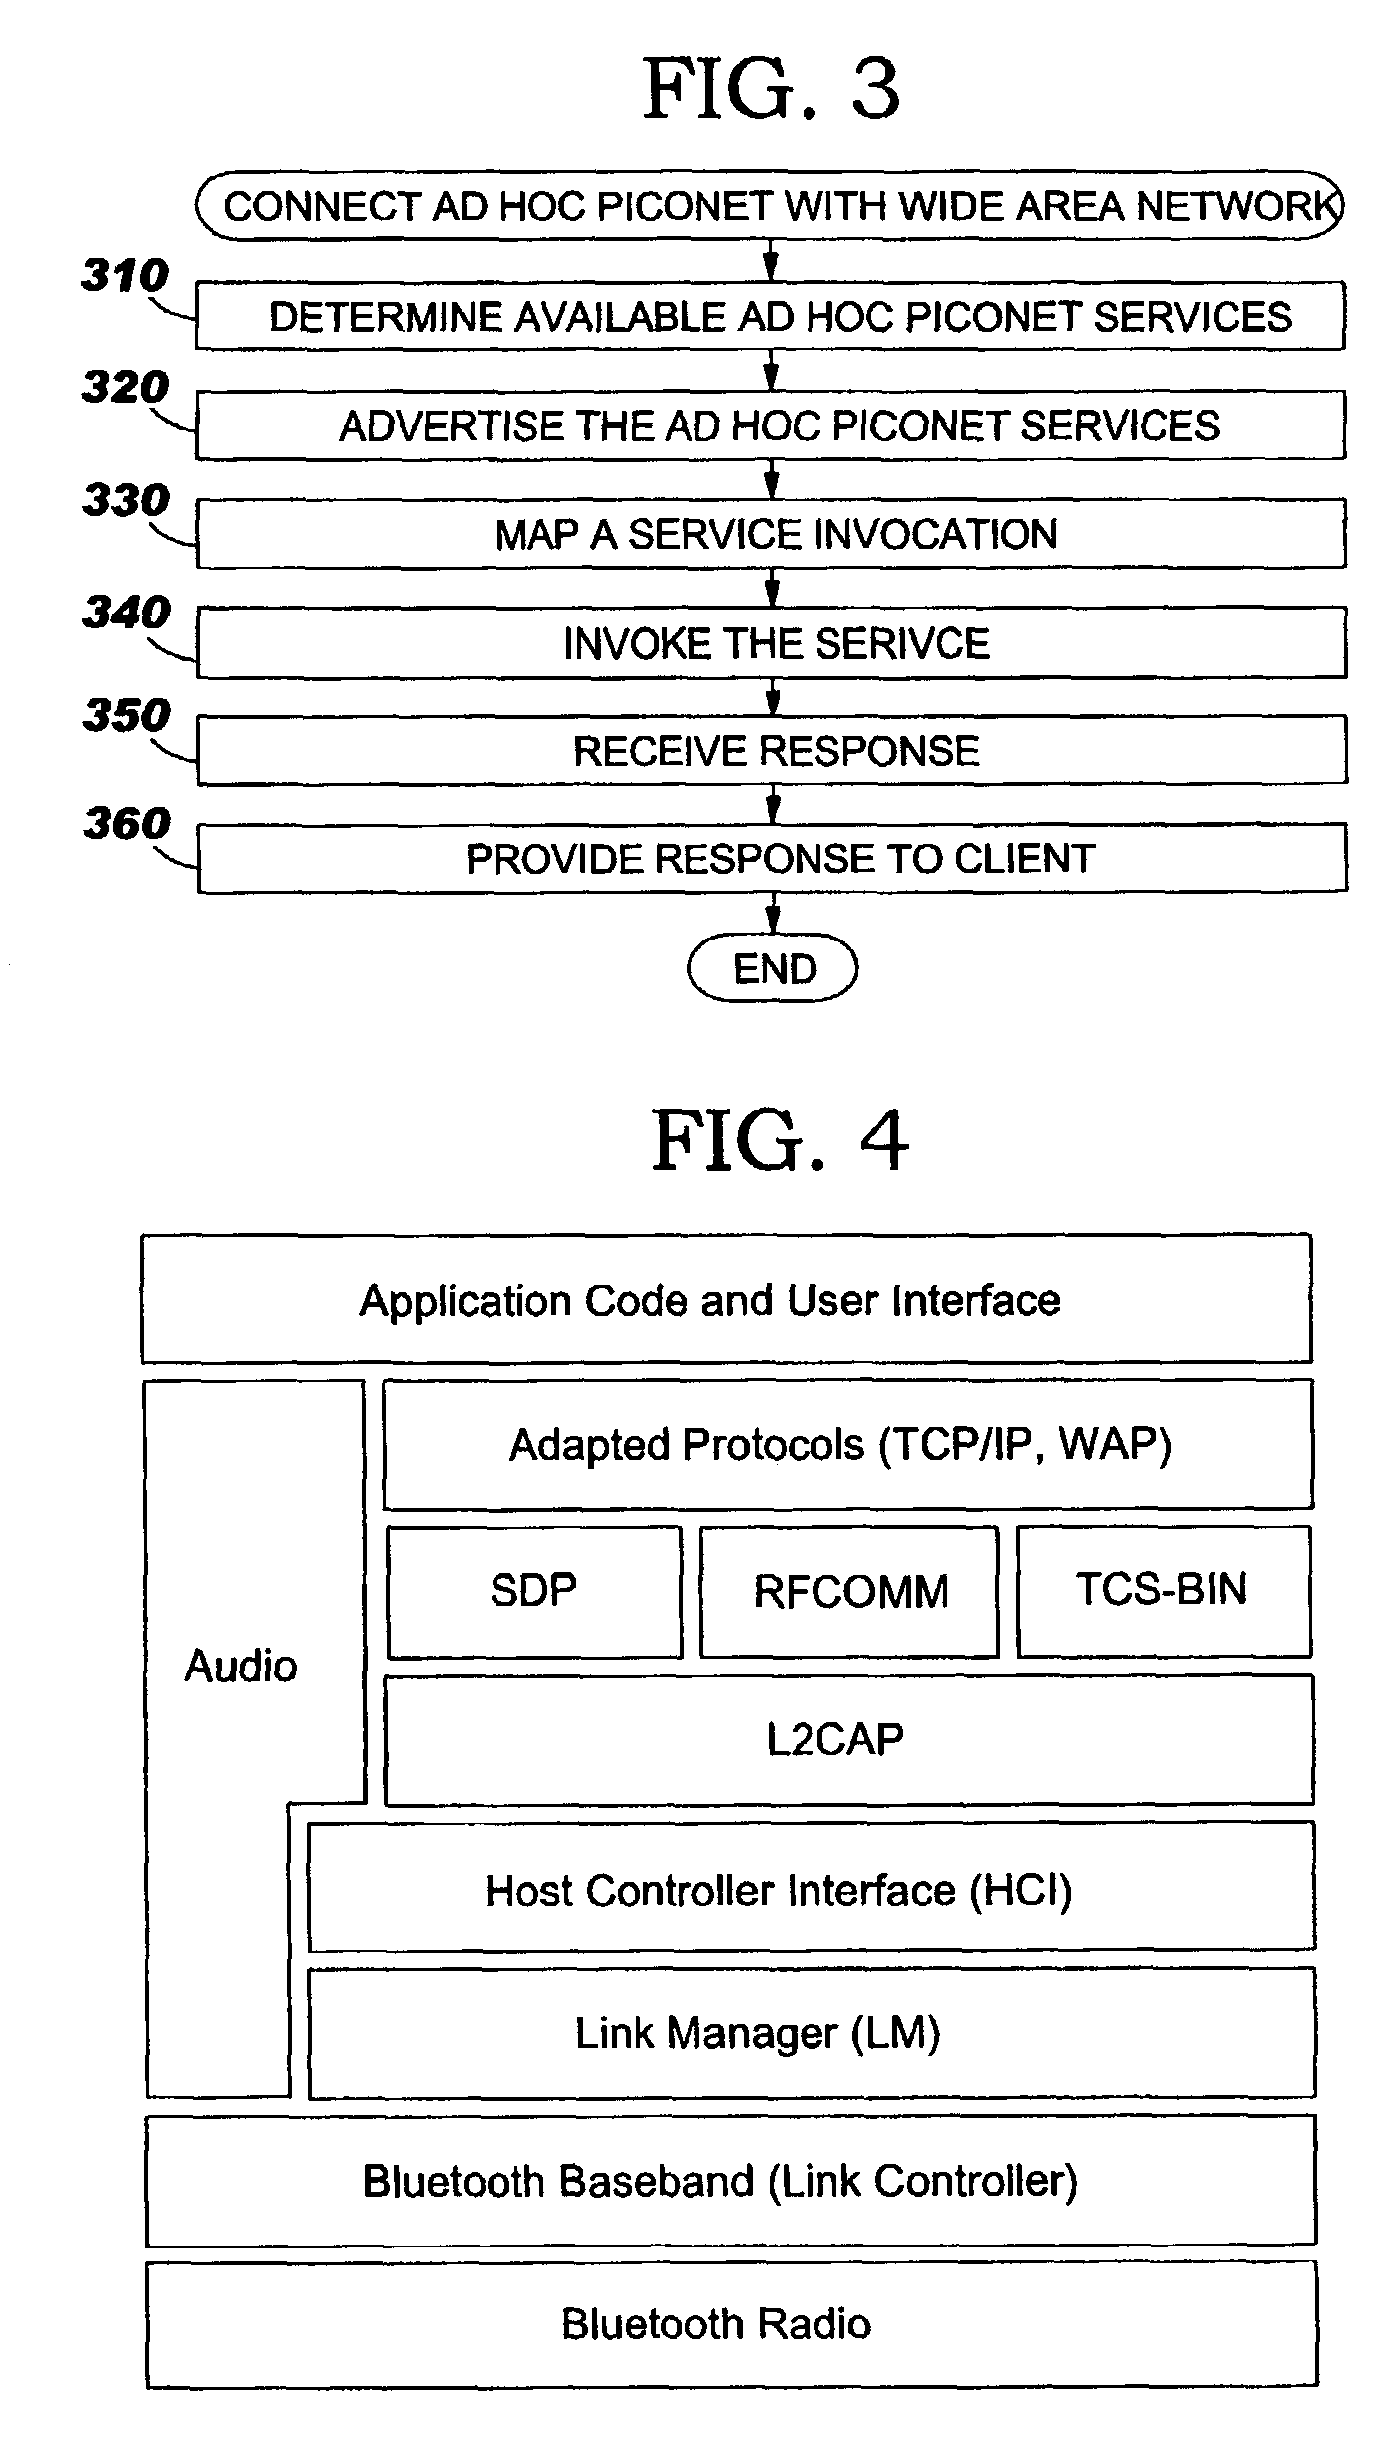 Systems, methods and computer program products for connecting ad hoc piconets to wide area networks